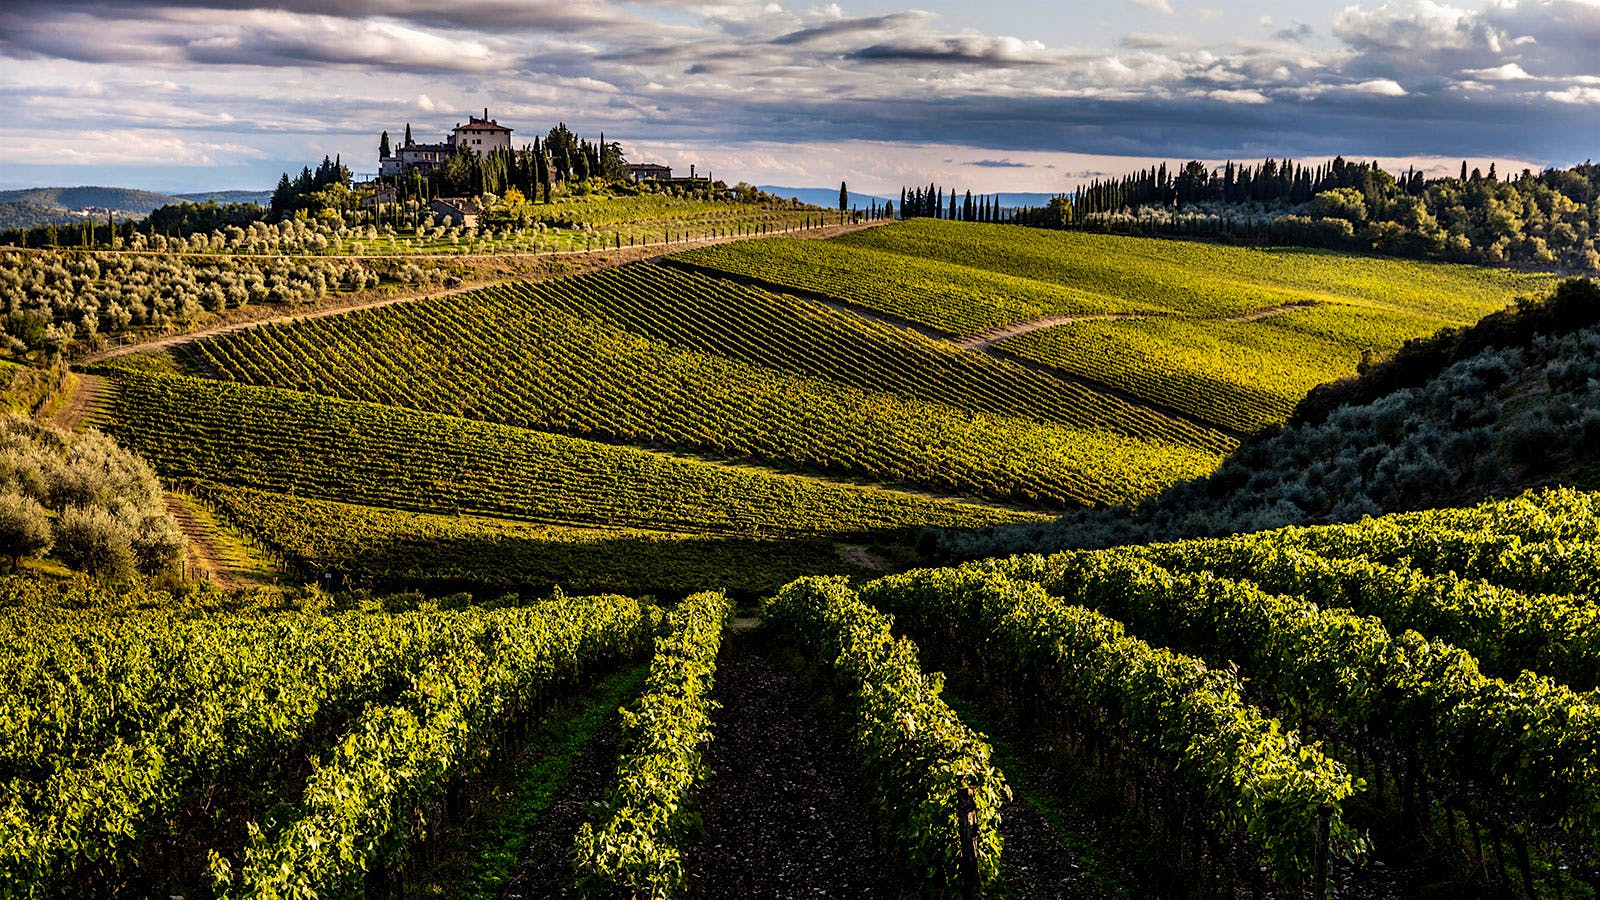 Exclusive: Frescobaldi Extends Its Winery Holdings into Chianti Classico